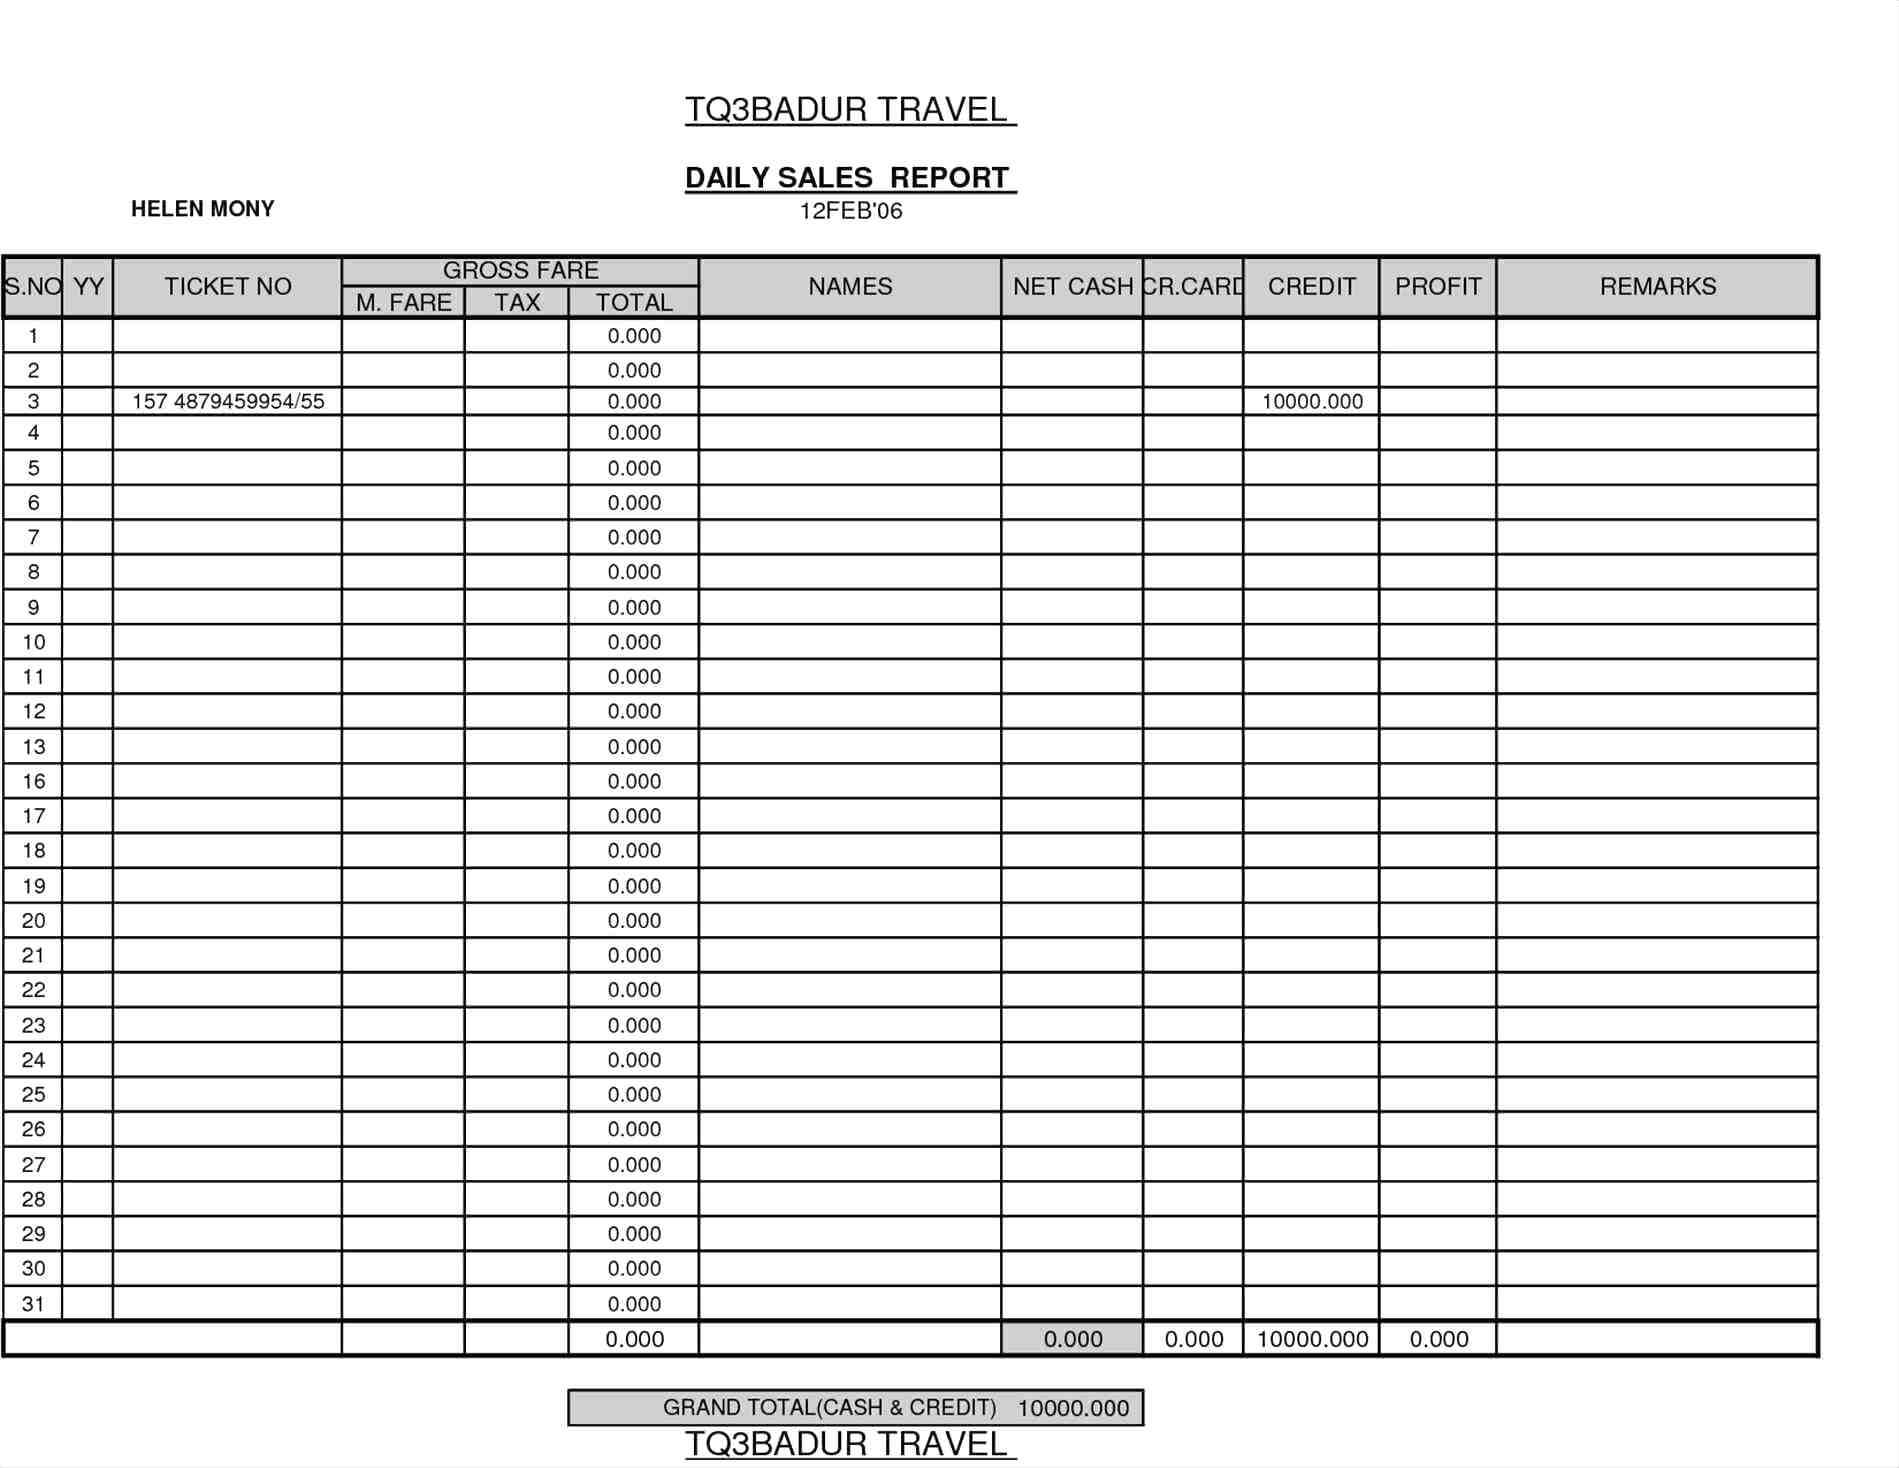 045 Sales Call Reporting Template Weekly Report Marvelous For Daily Sales Call Report Template Free Download